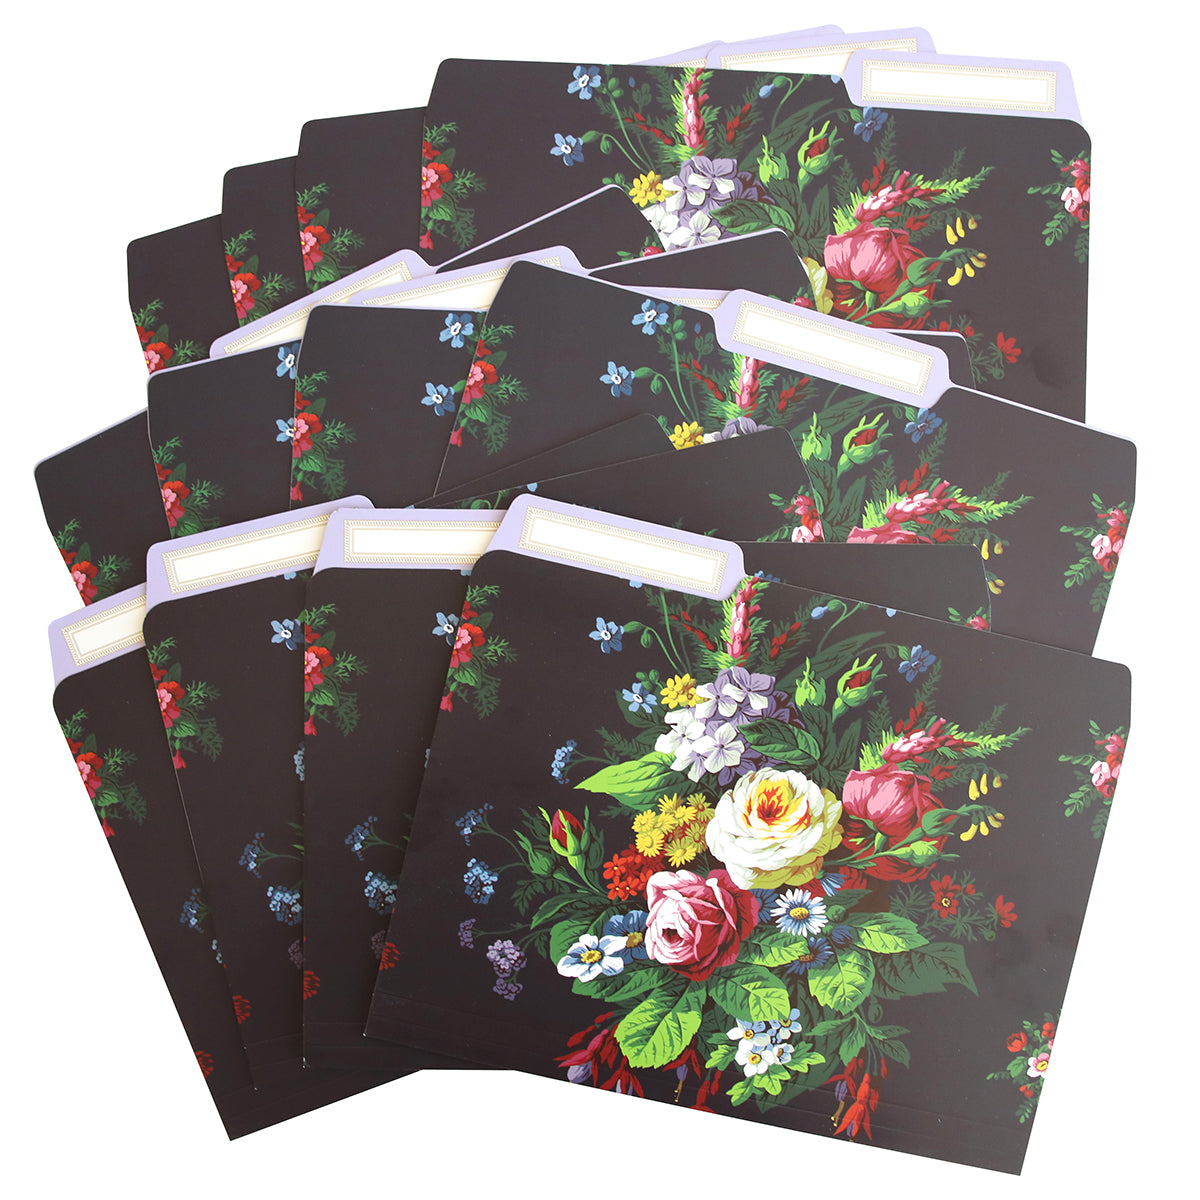 A set of Astrid Floral File Folders. Includes 12 standard size folders and 3 tab dividers.